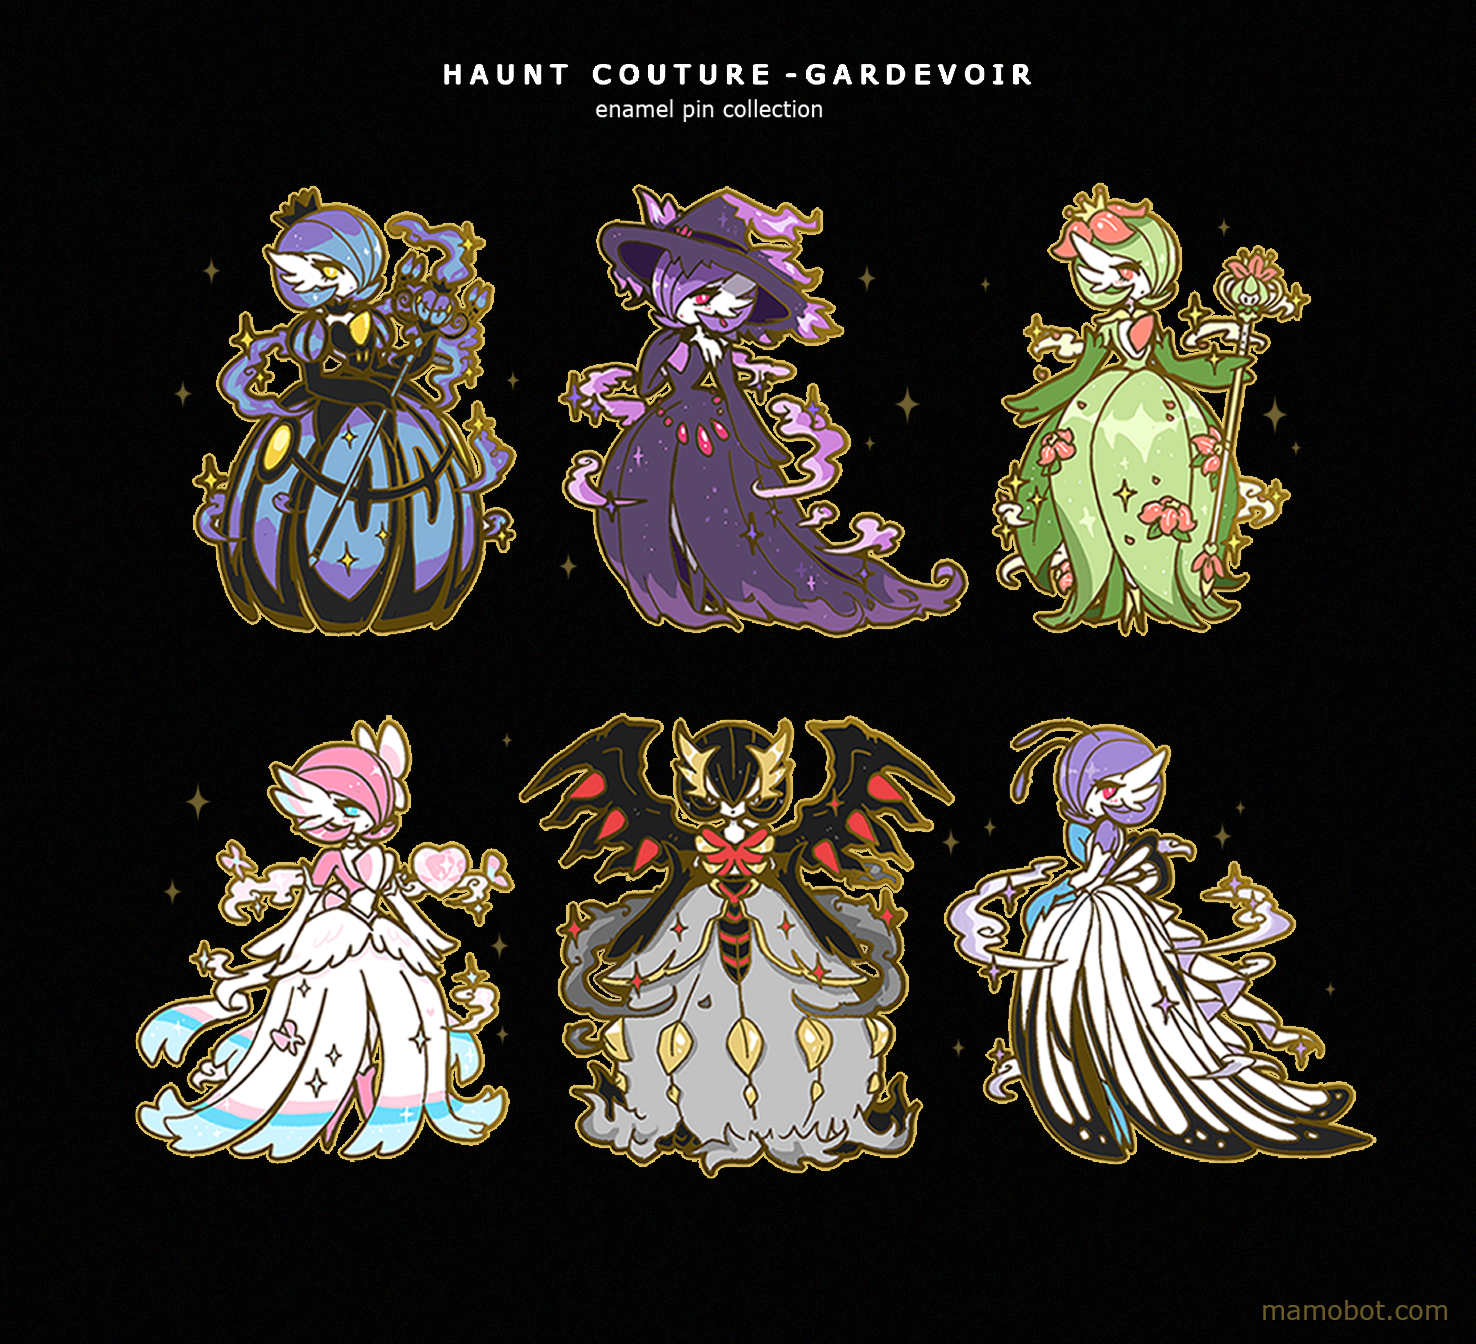 HAUNT COUTURE GARDEVOIR FASHION ENAMELPIN COLLECTION   [PREORDER] [ SHIPPING LATE OCT/NOV]